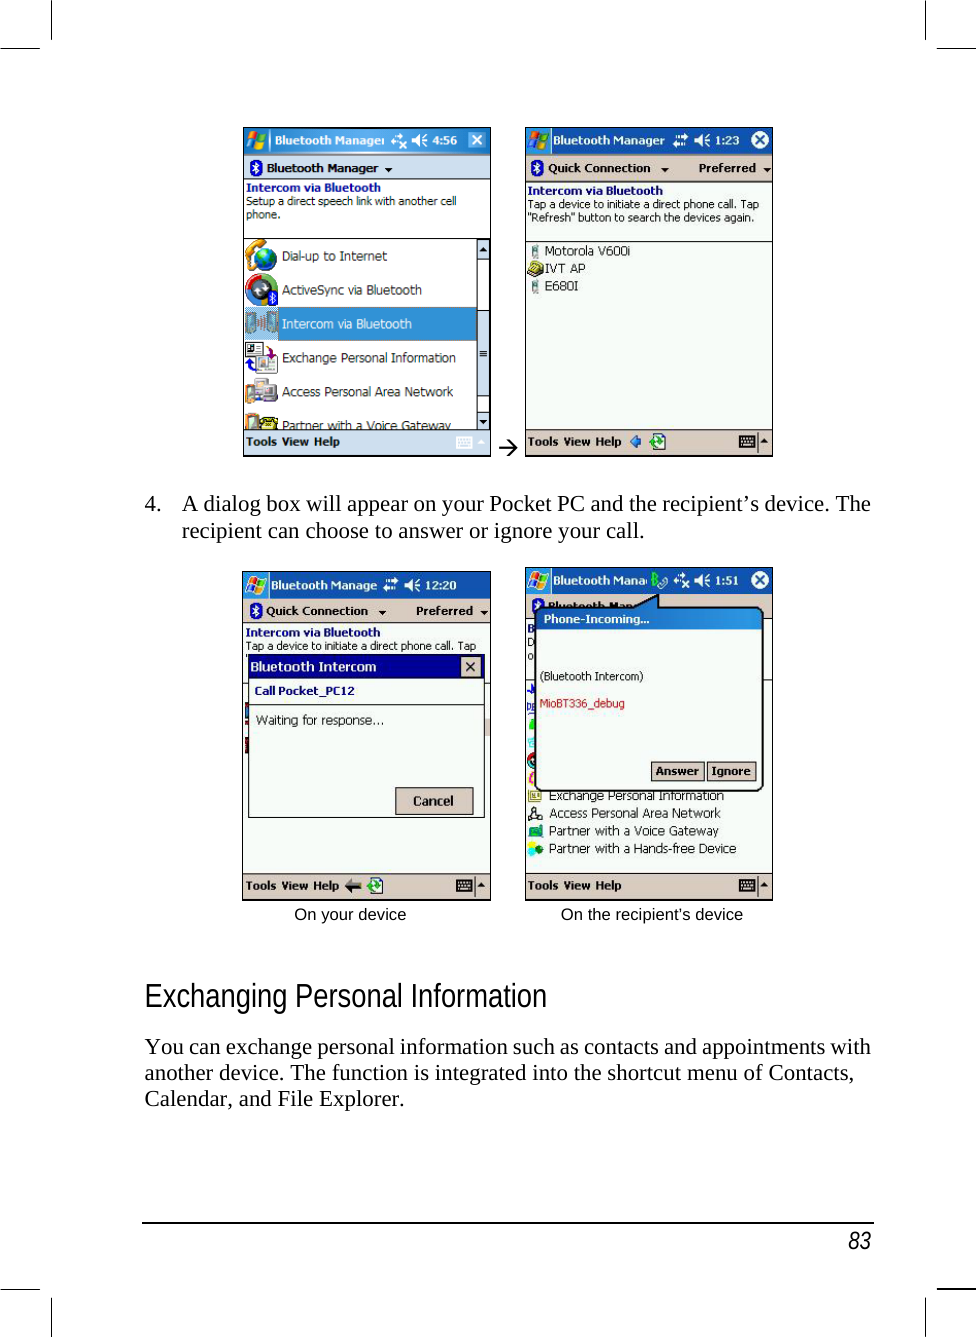   83     4.  A dialog box will appear on your Pocket PC and the recipient’s device. The recipient can choose to answer or ignore your call.             On your device              On the recipient’s device  Exchanging Personal Information You can exchange personal information such as contacts and appointments with another device. The function is integrated into the shortcut menu of Contacts, Calendar, and File Explorer. 